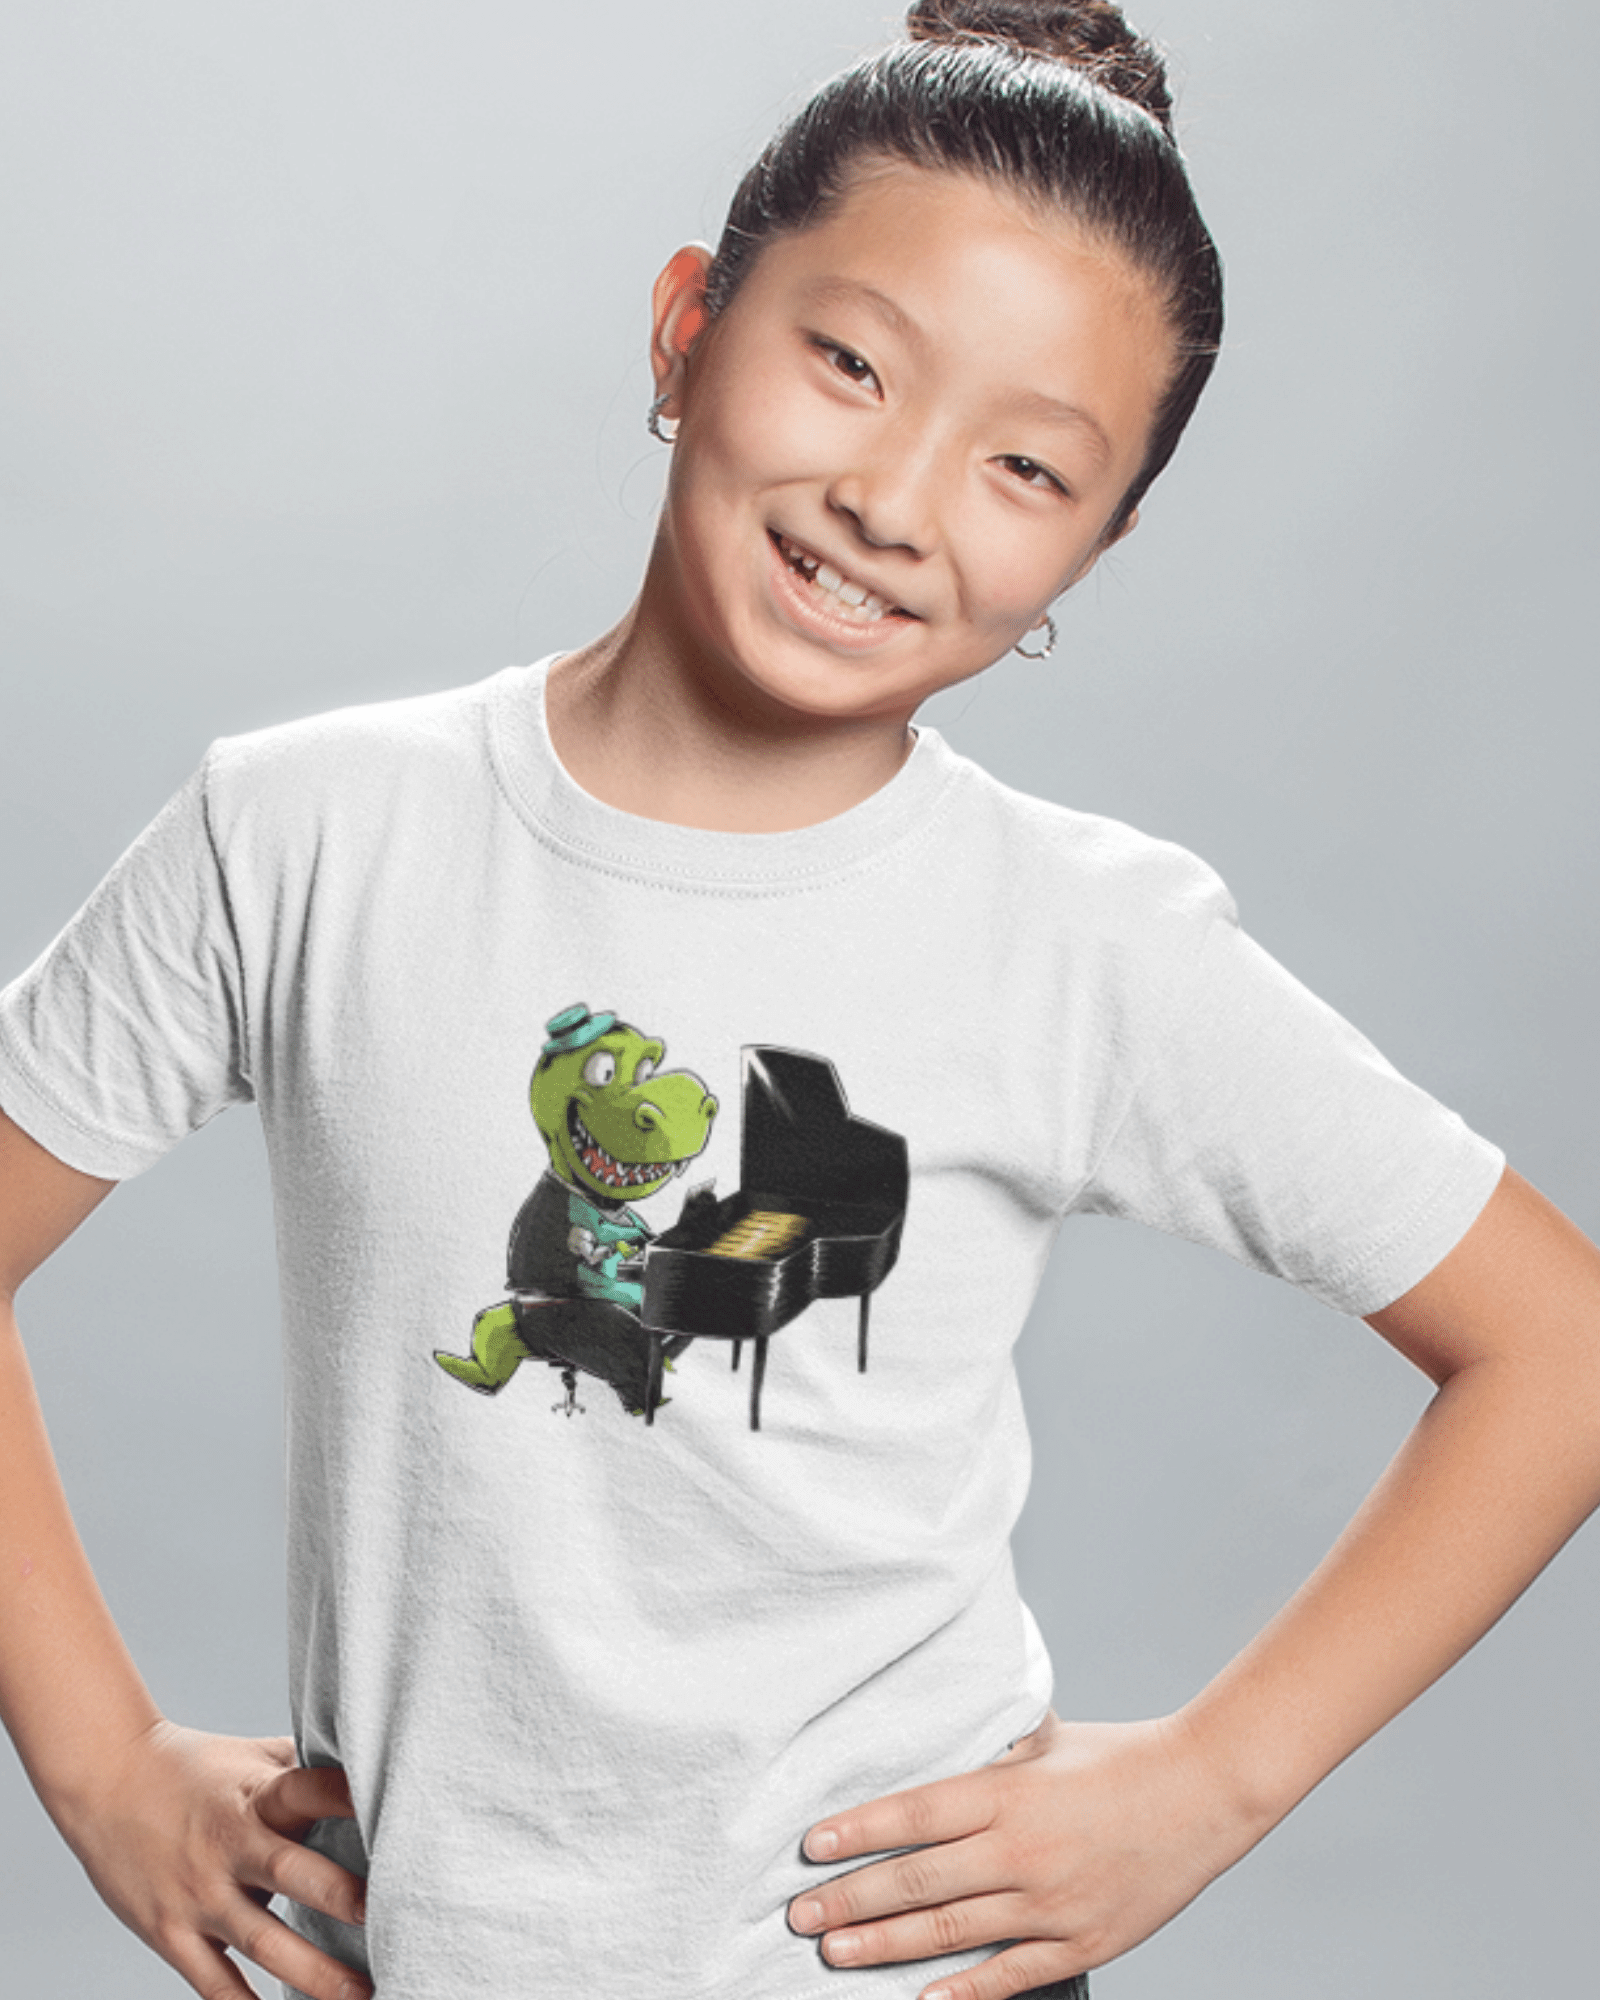 girl wearing a t shirt with a piano playing dinosaur